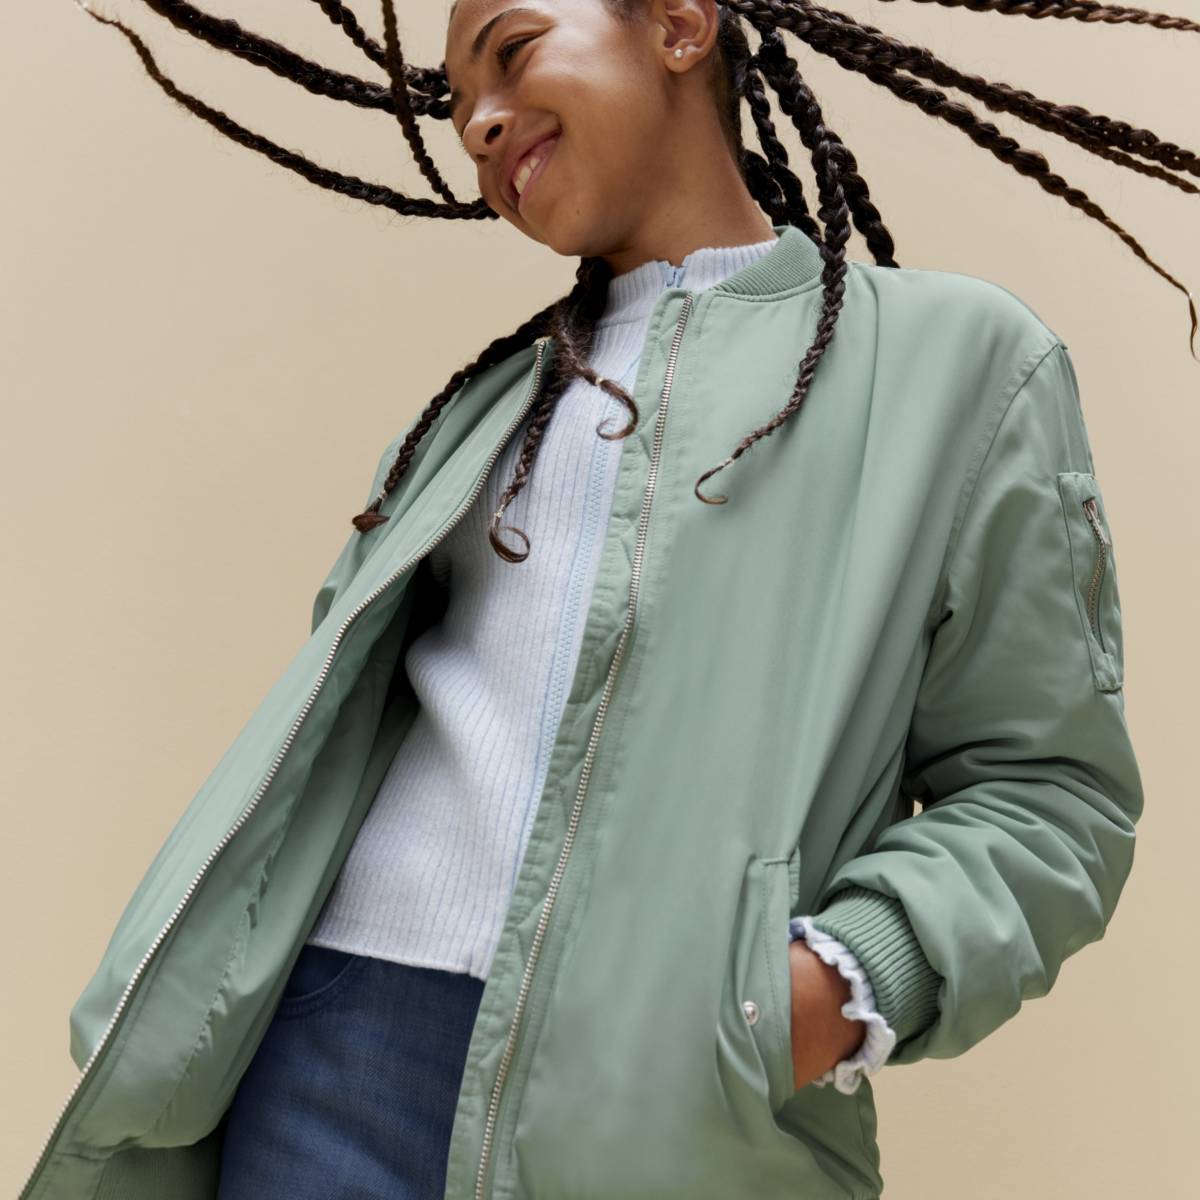 Girl wearing green bomber jacket, white top and jeans 